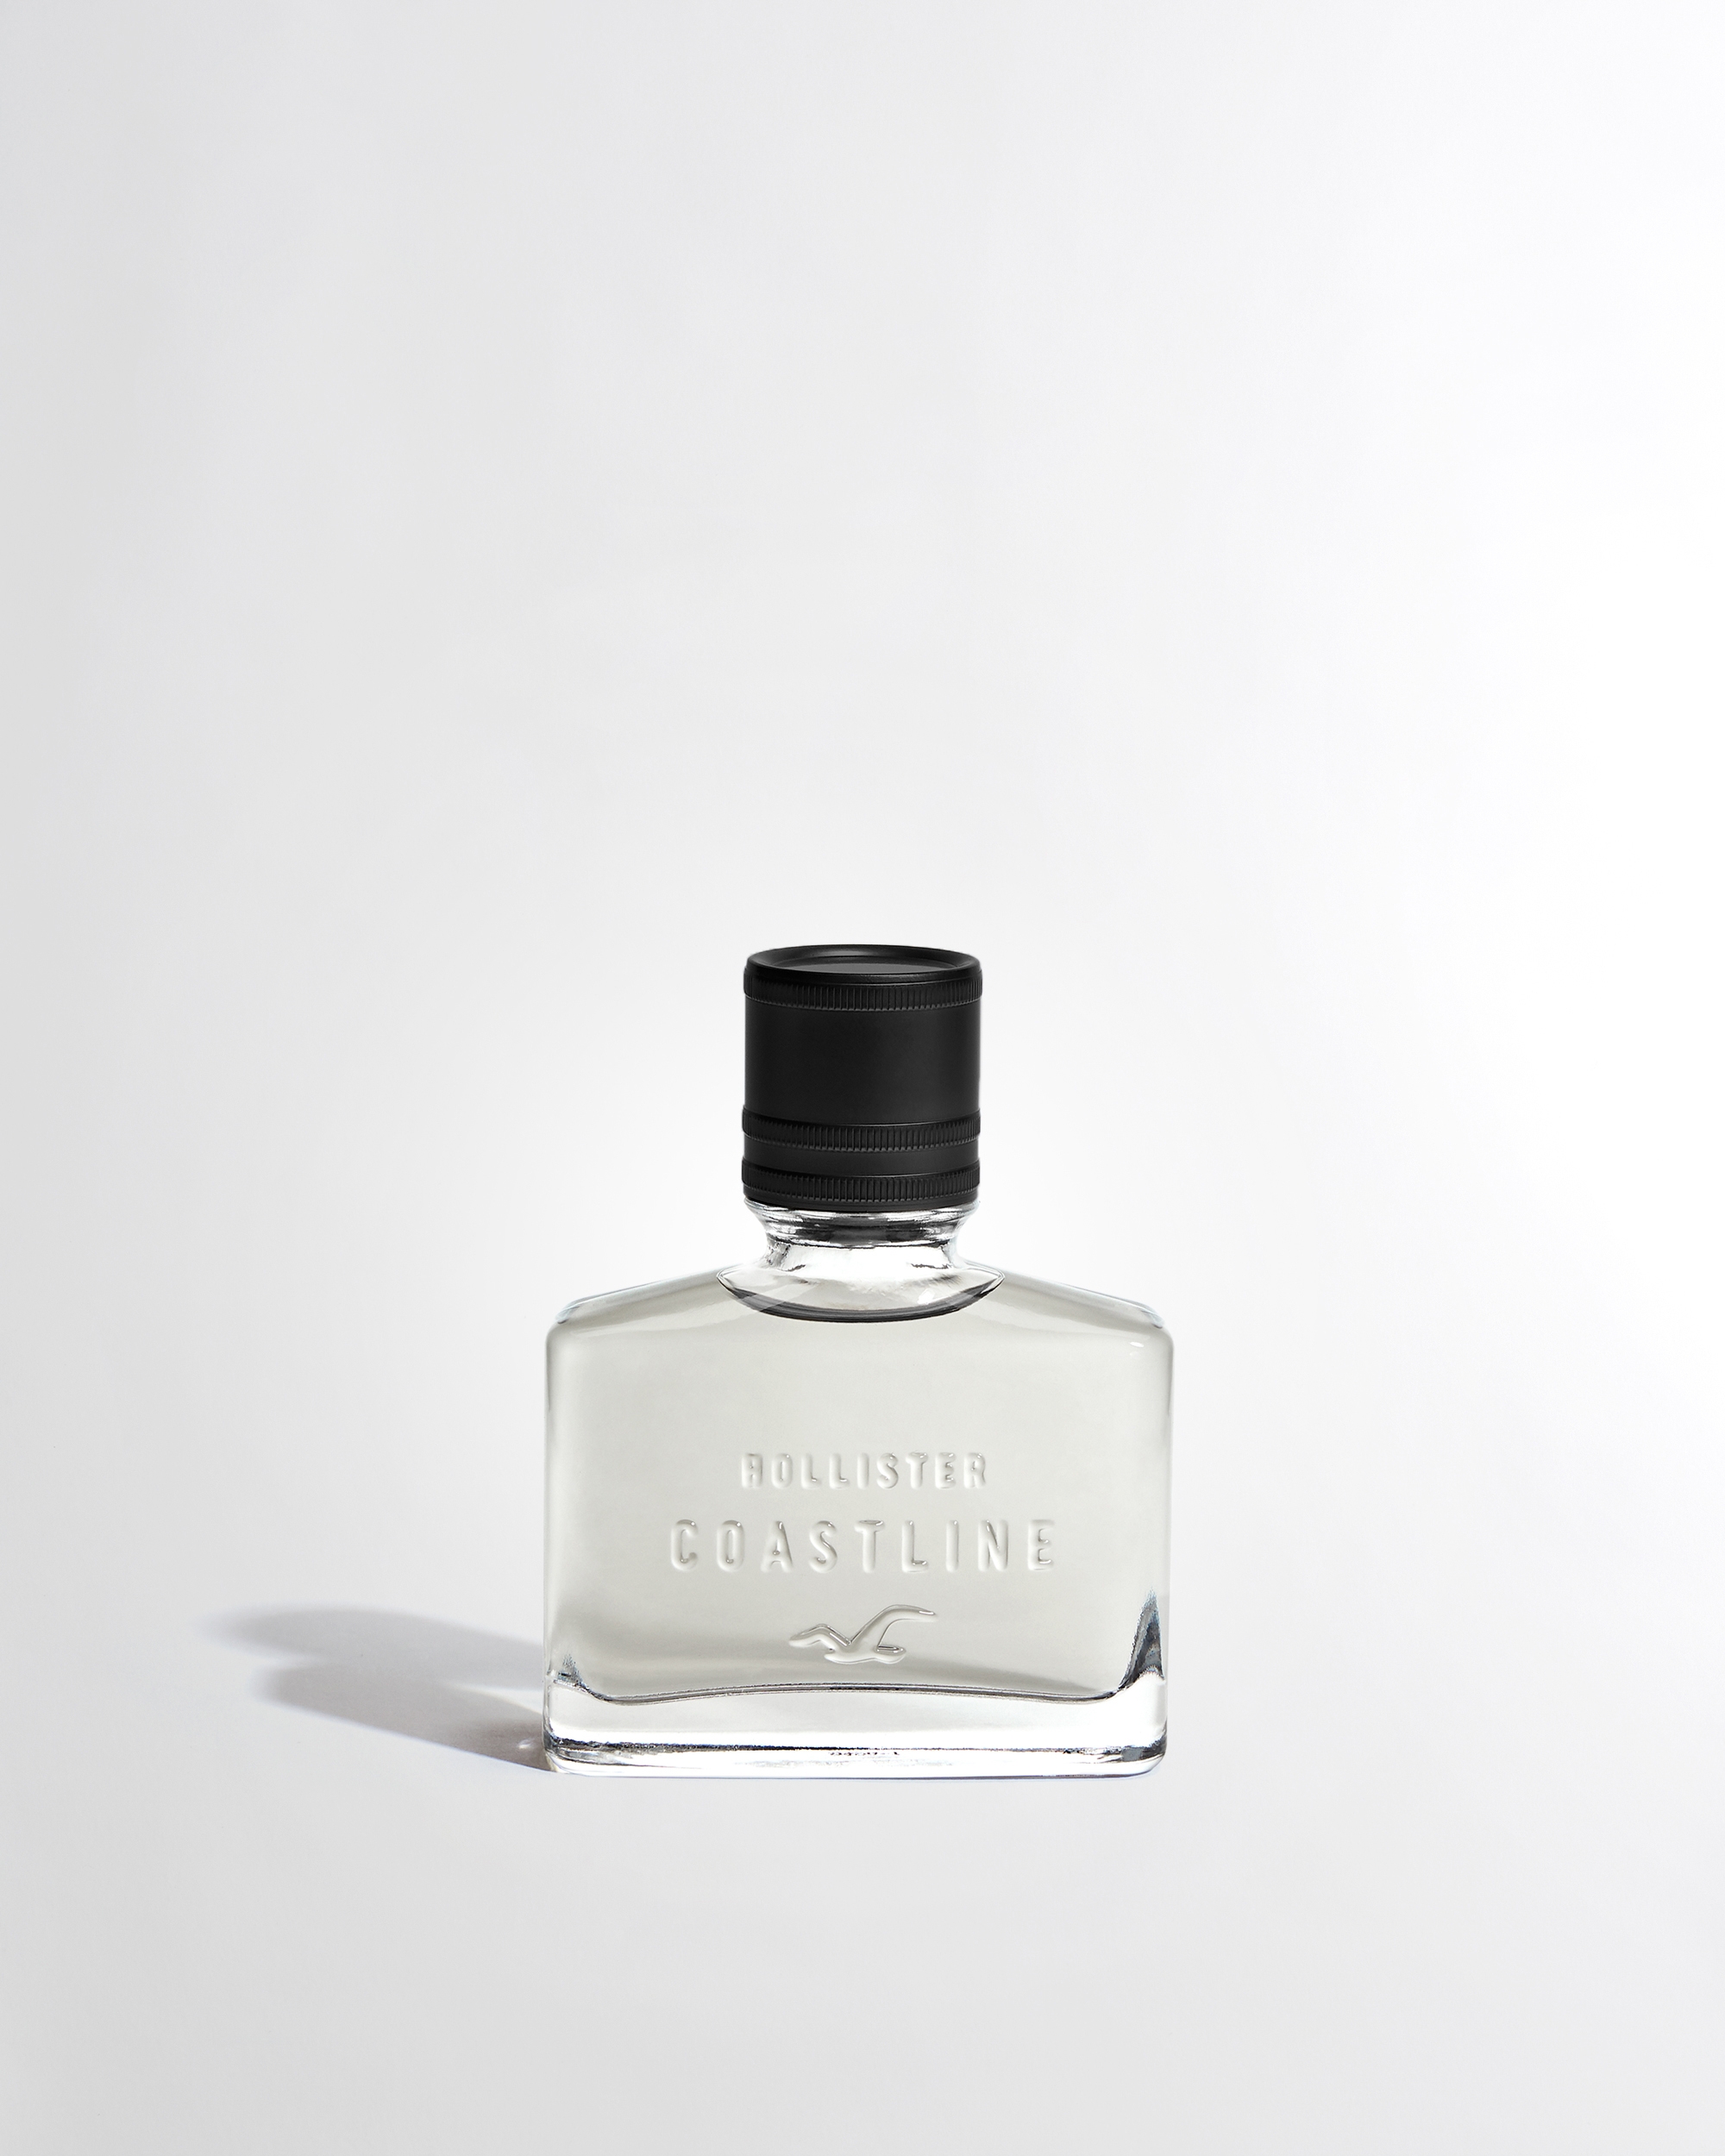 hollister night cologne